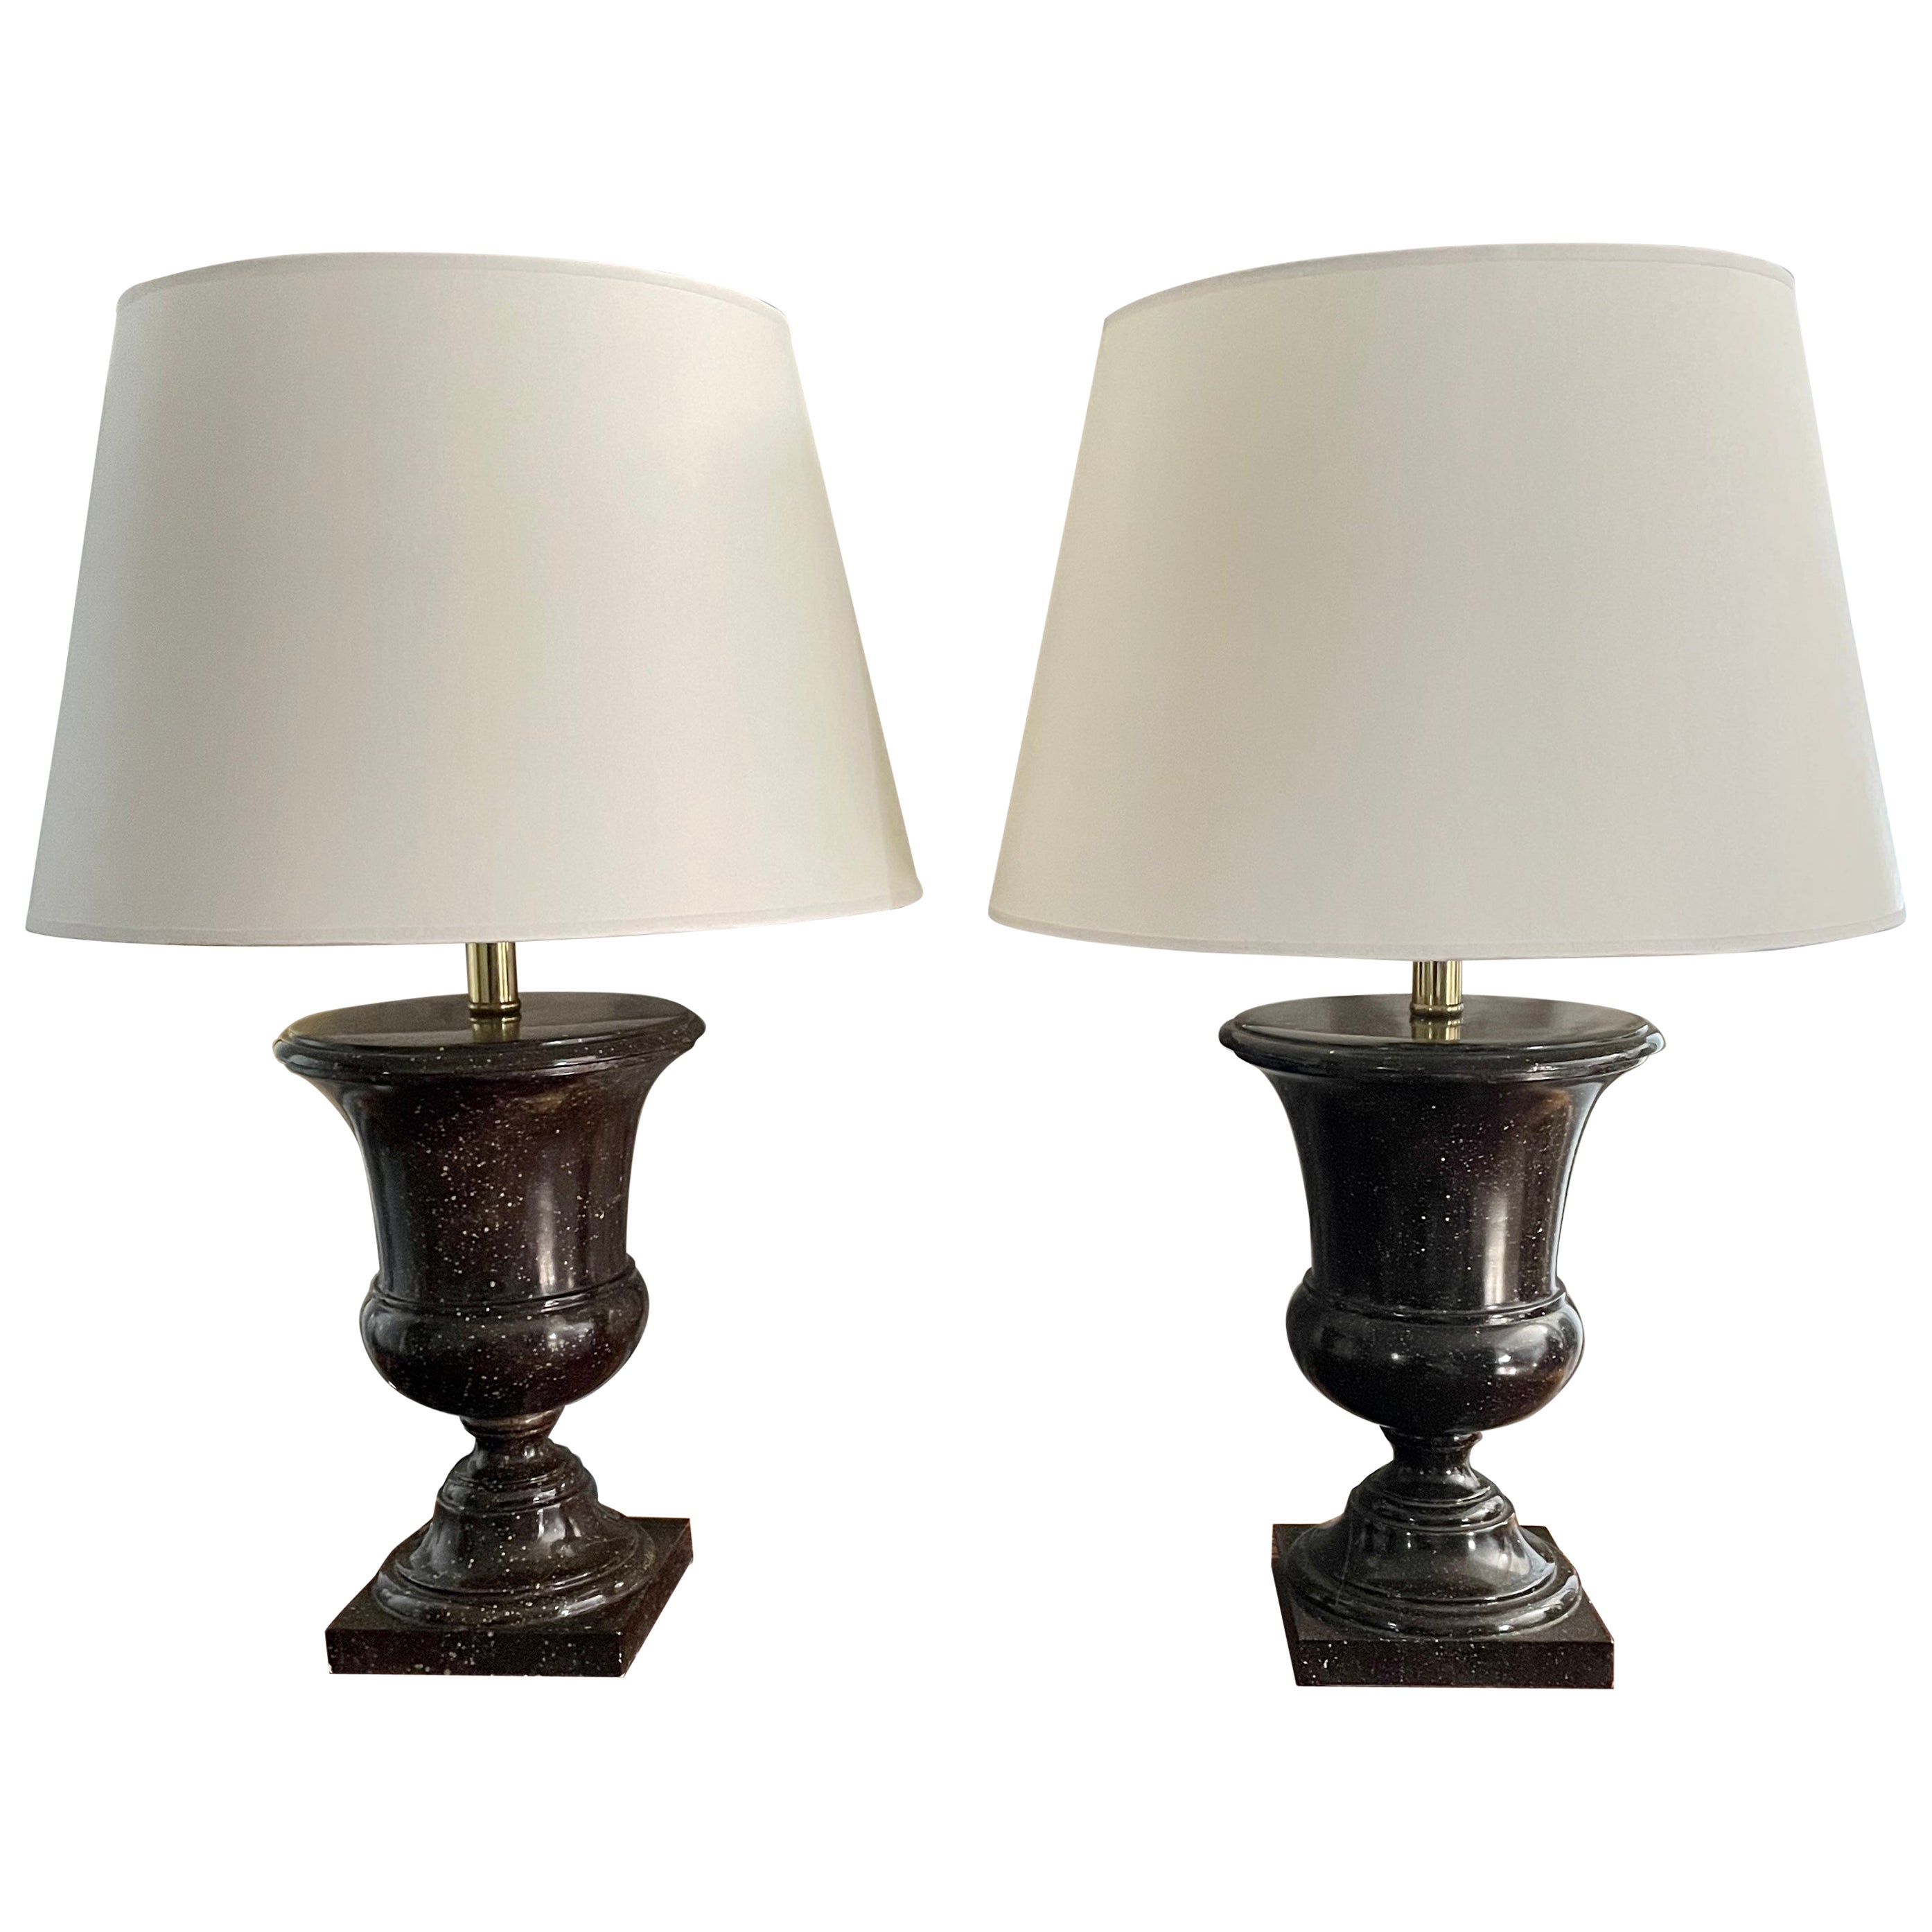 Pair of Faux Porphyry Urn Form Lamps